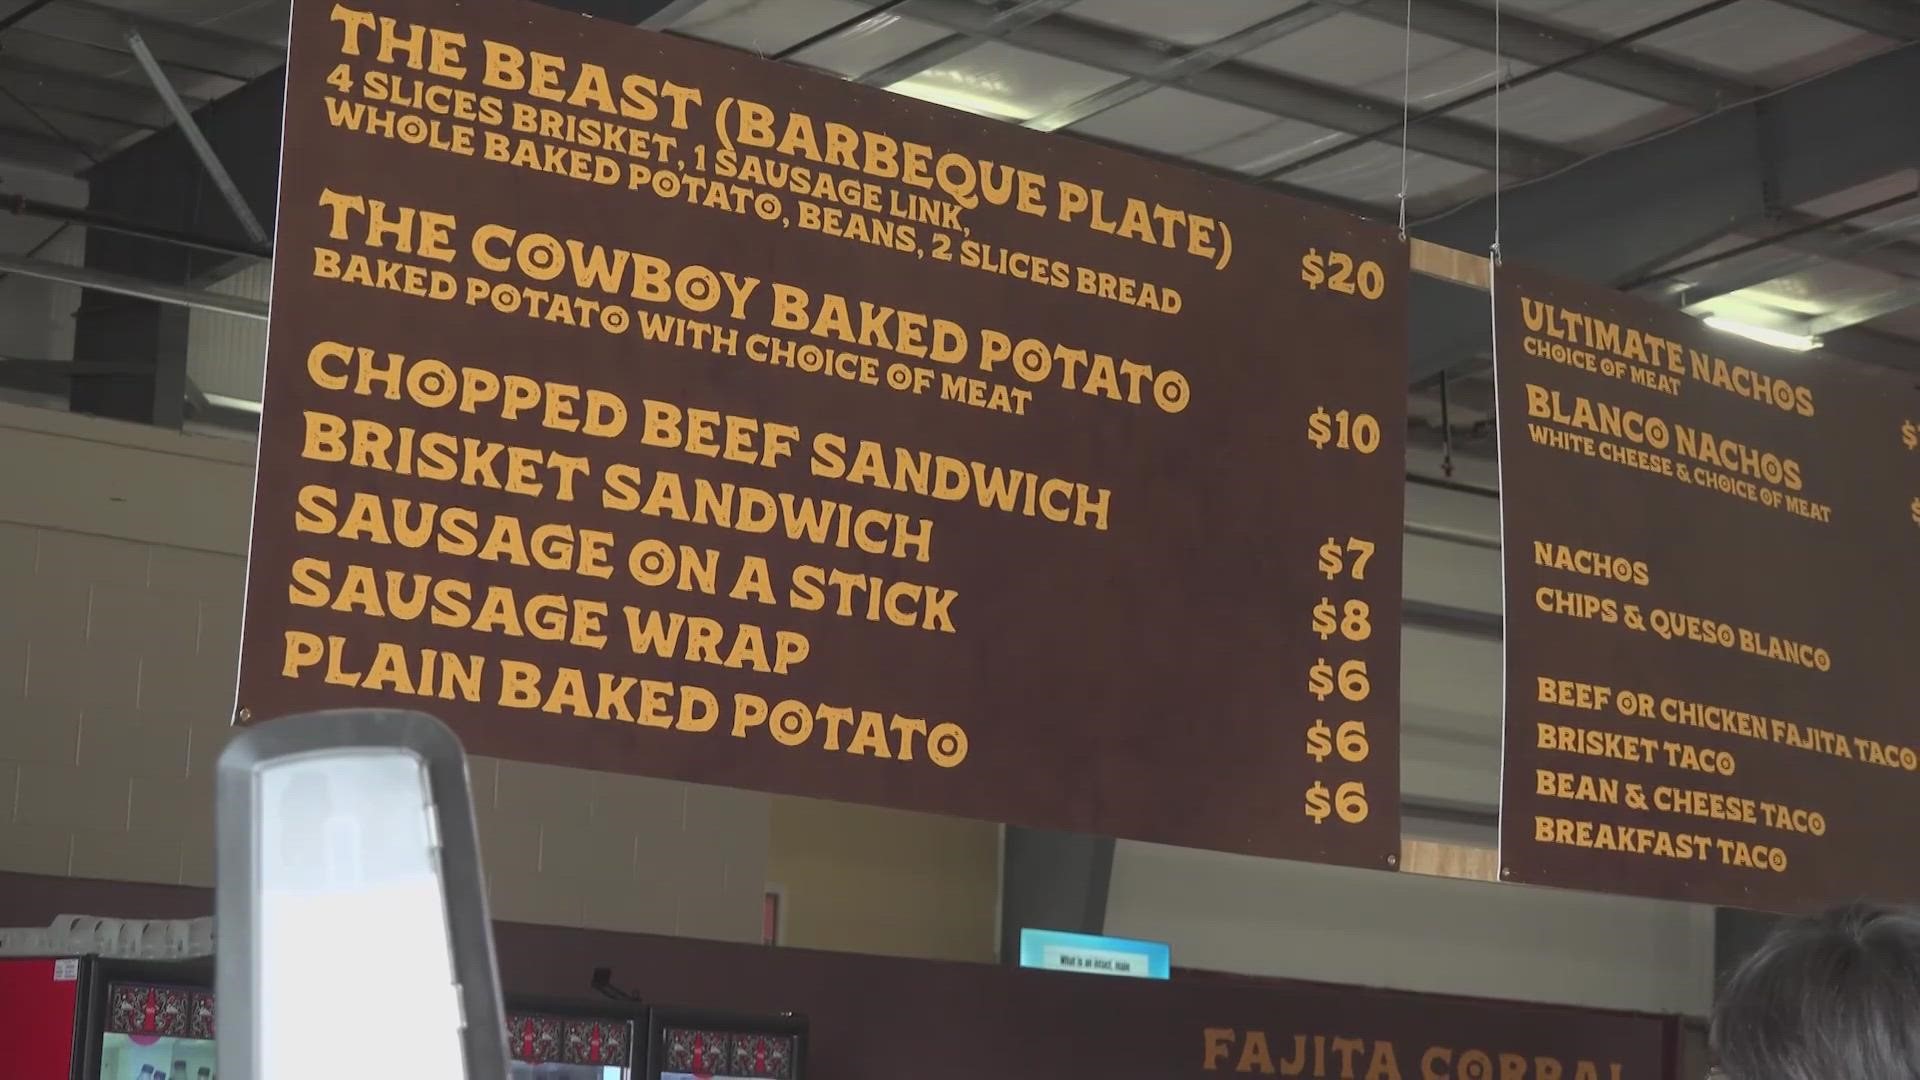 If you've been to the rodeo in the past couple of weeks you may notice higher prices at the vendor booths. There is a very simple reason for them: inflation.